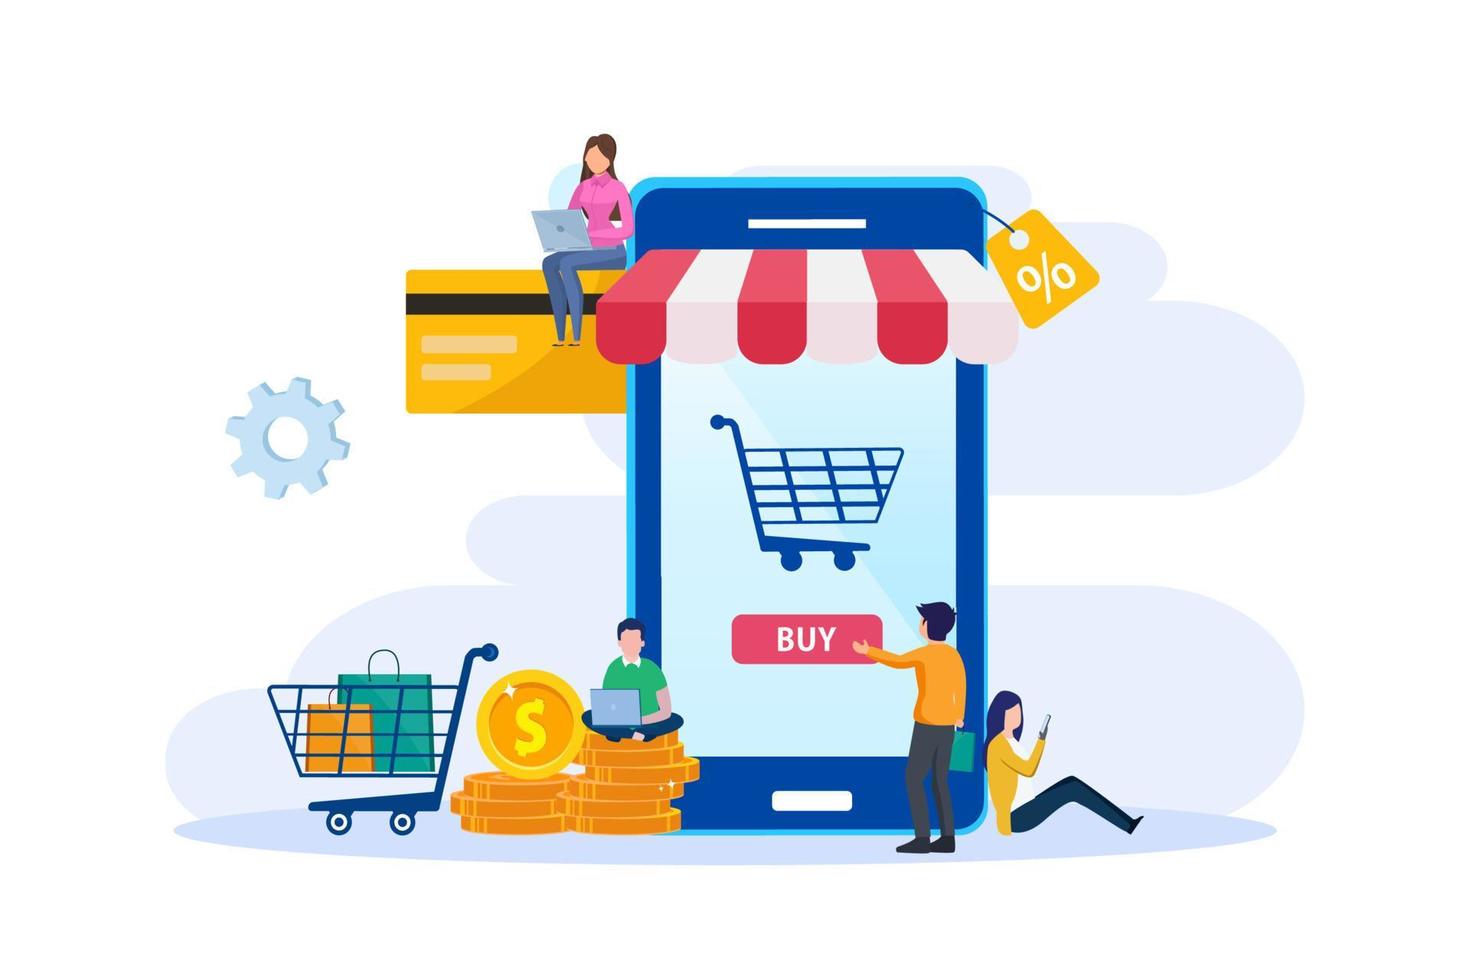 Discounts, Sale Vector Illustration. Online Store in the Mobile Application of the Smartphone. Tiny People choose goods at Low Prices in their Gadgets